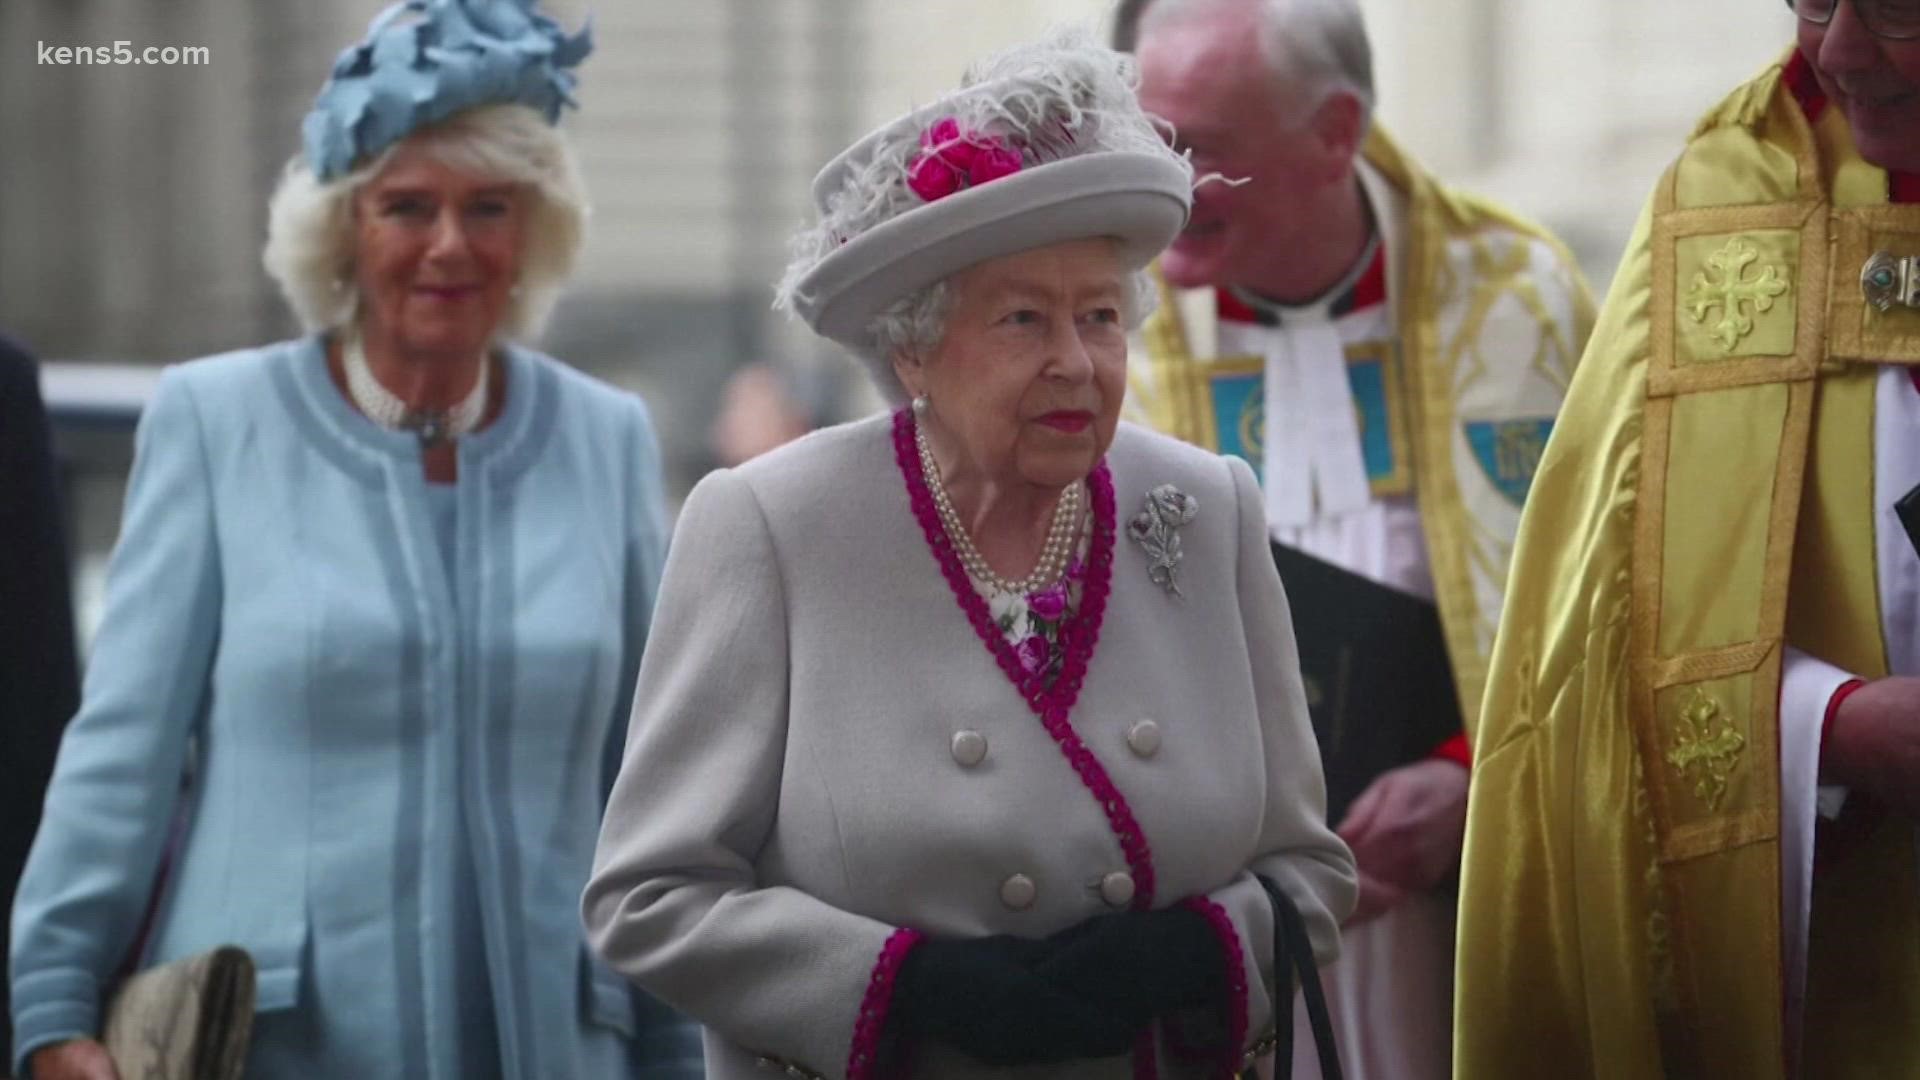 Queen Elizabeth II turns 96 on Thursday. She is the longest-serving British monarch.